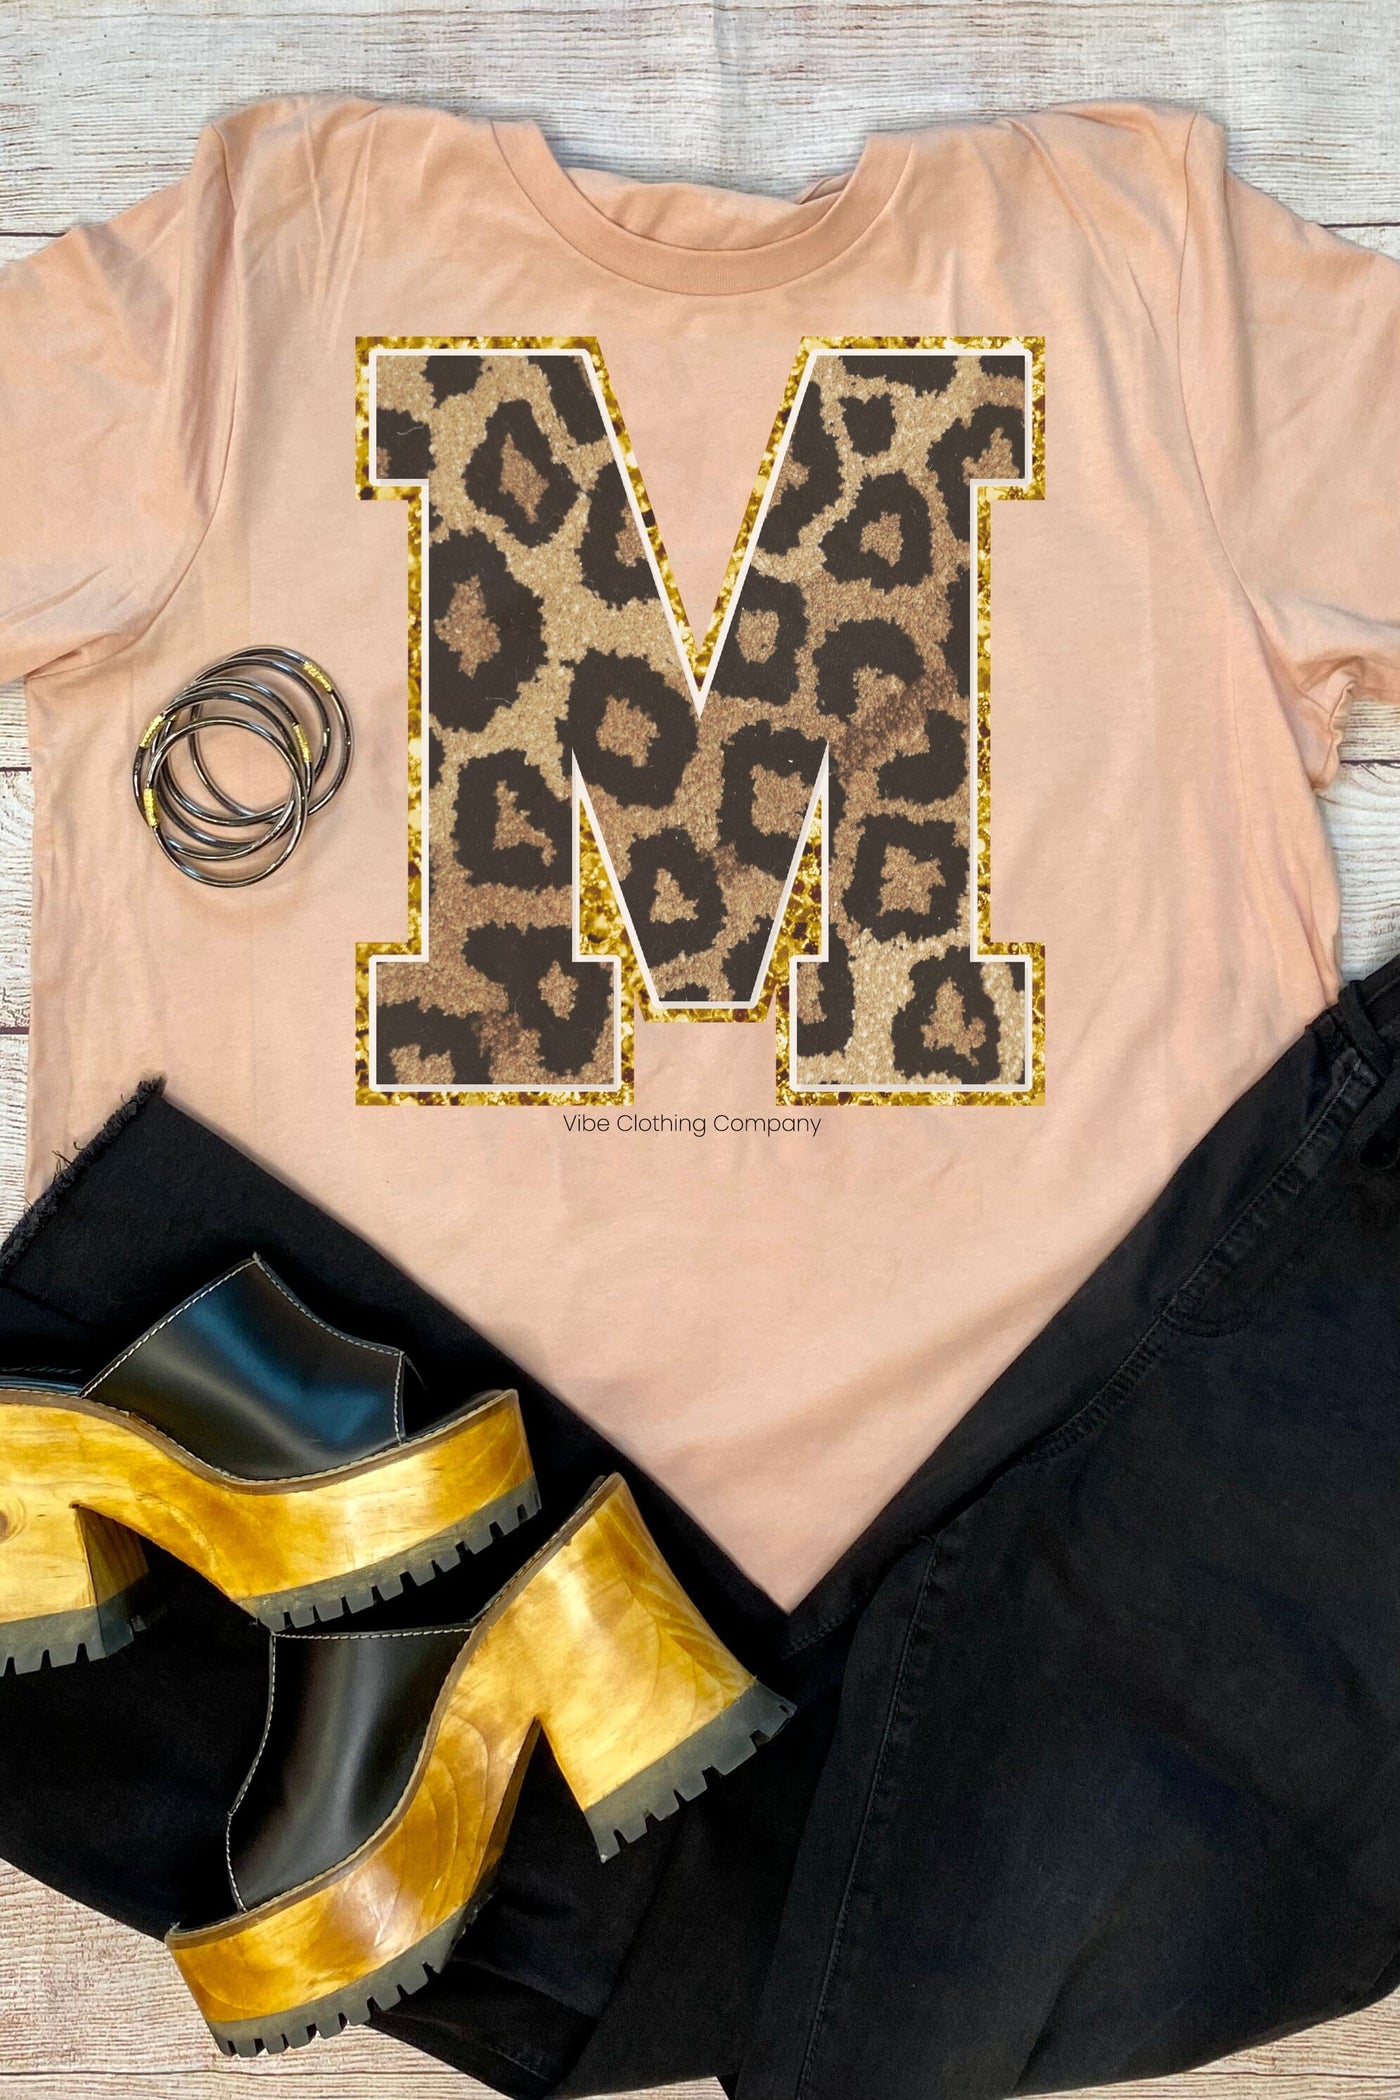 Initials A-M: Blush Graphic Tee, graphic tees VCC Small M 